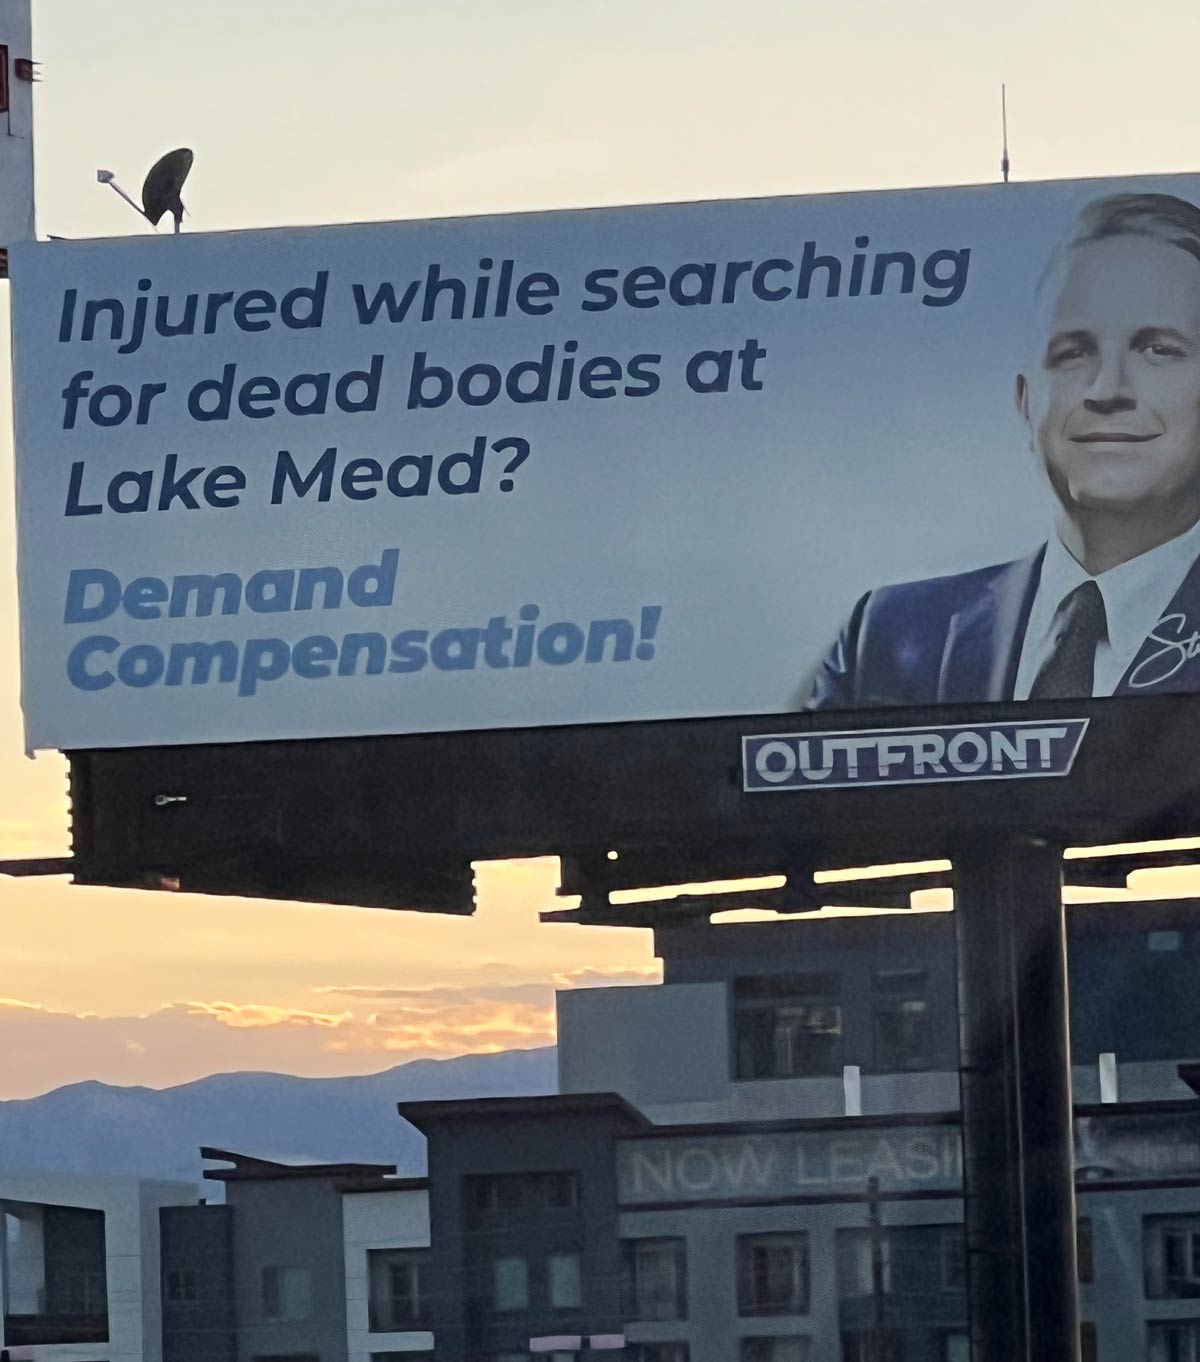 Injured while dropping off dead bodies at lake Mead? Keep your damn mouth shut